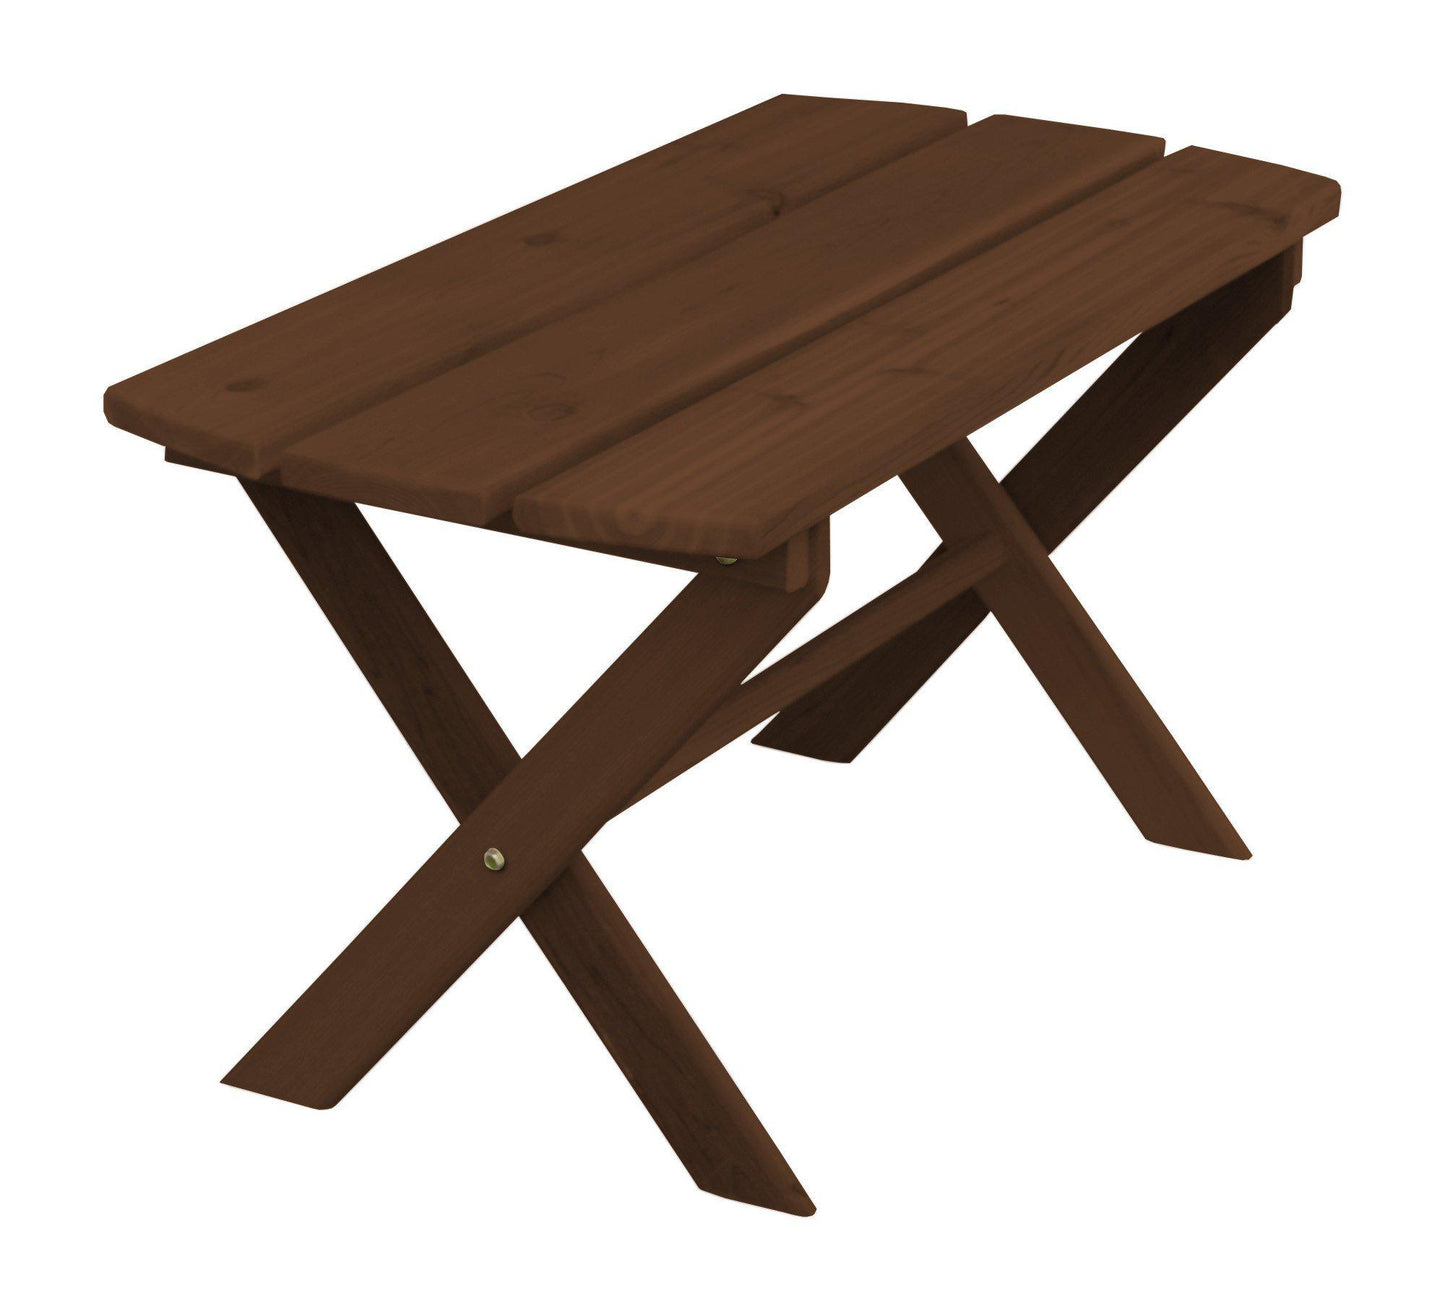 Regallion Outdoor Western Red Cedar Folding Coffee Table - LEAD TIME TO SHIP 2 WEEKS